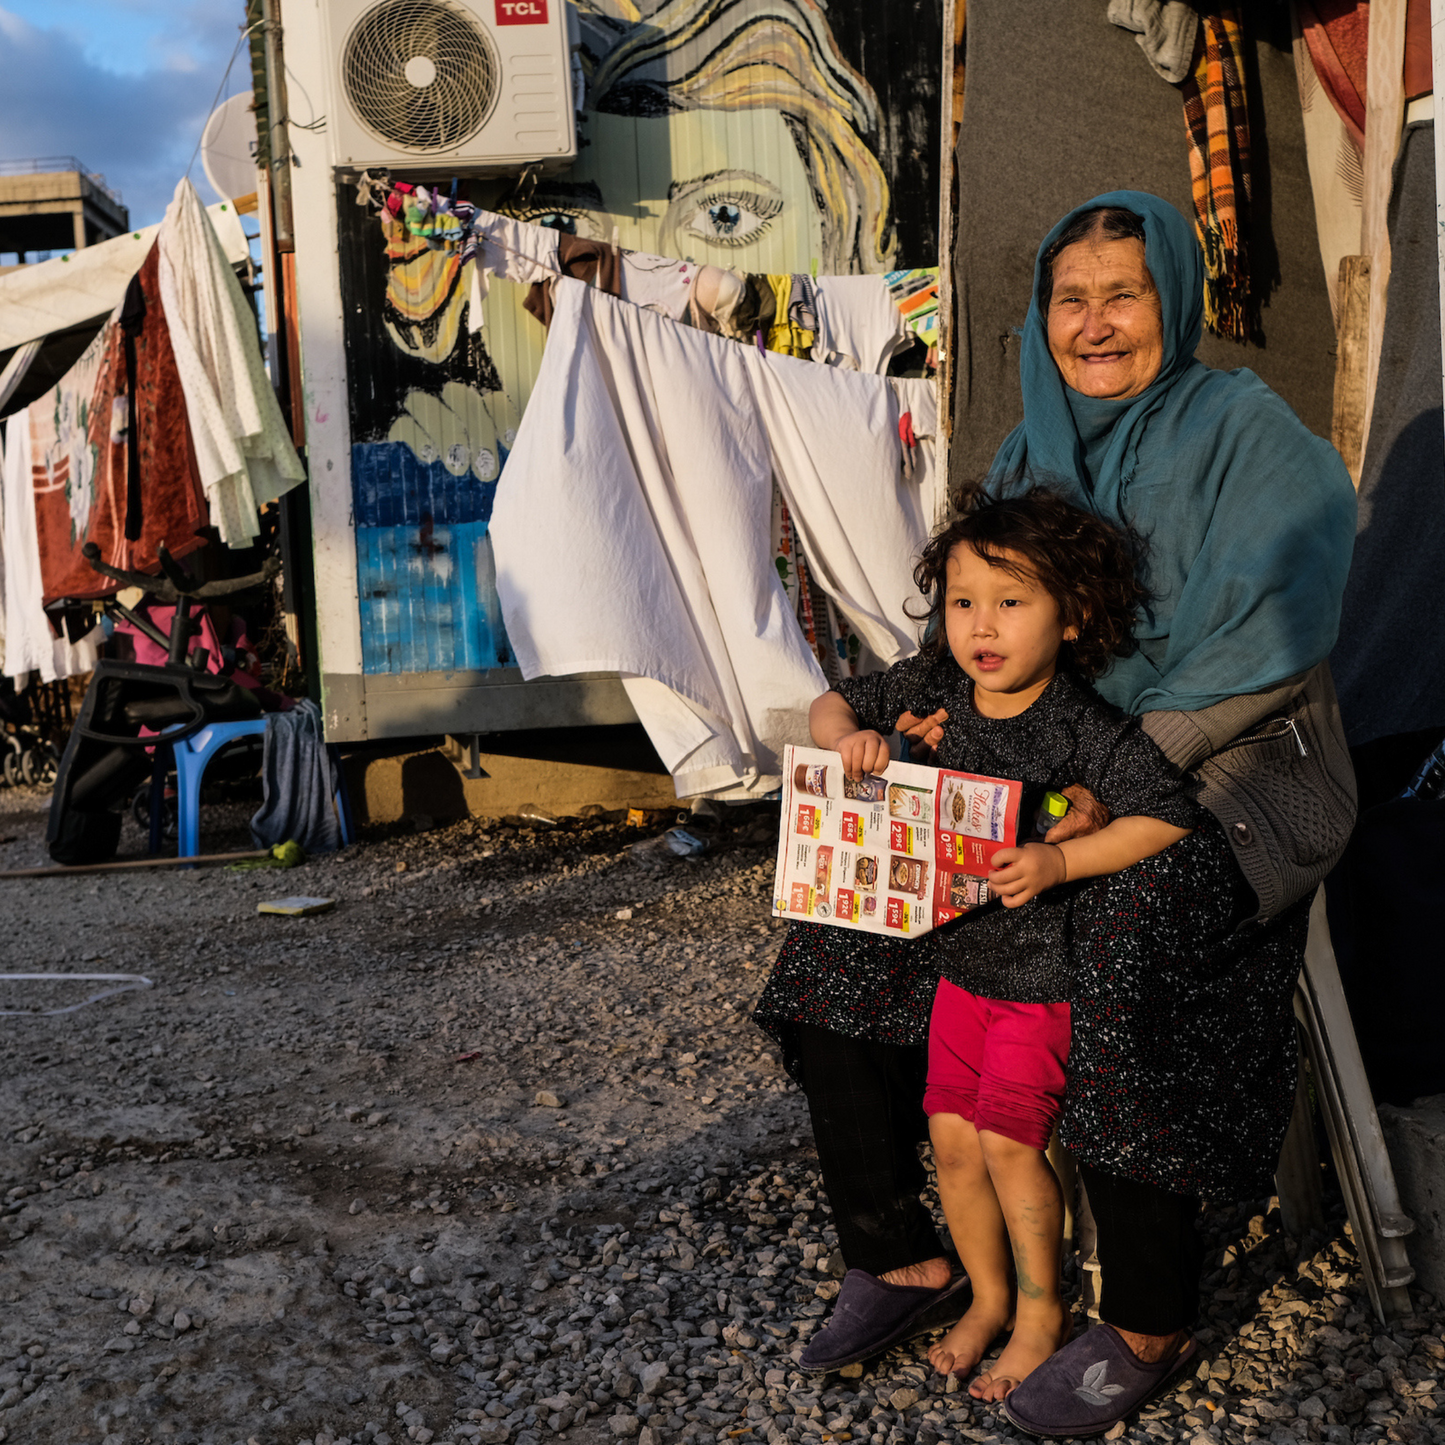 This photography taken in a refugee camp shows an older woman sitting down whilst holding a child. In the background there are clothes, bedding and thick blankets hanging off ropes to dry.